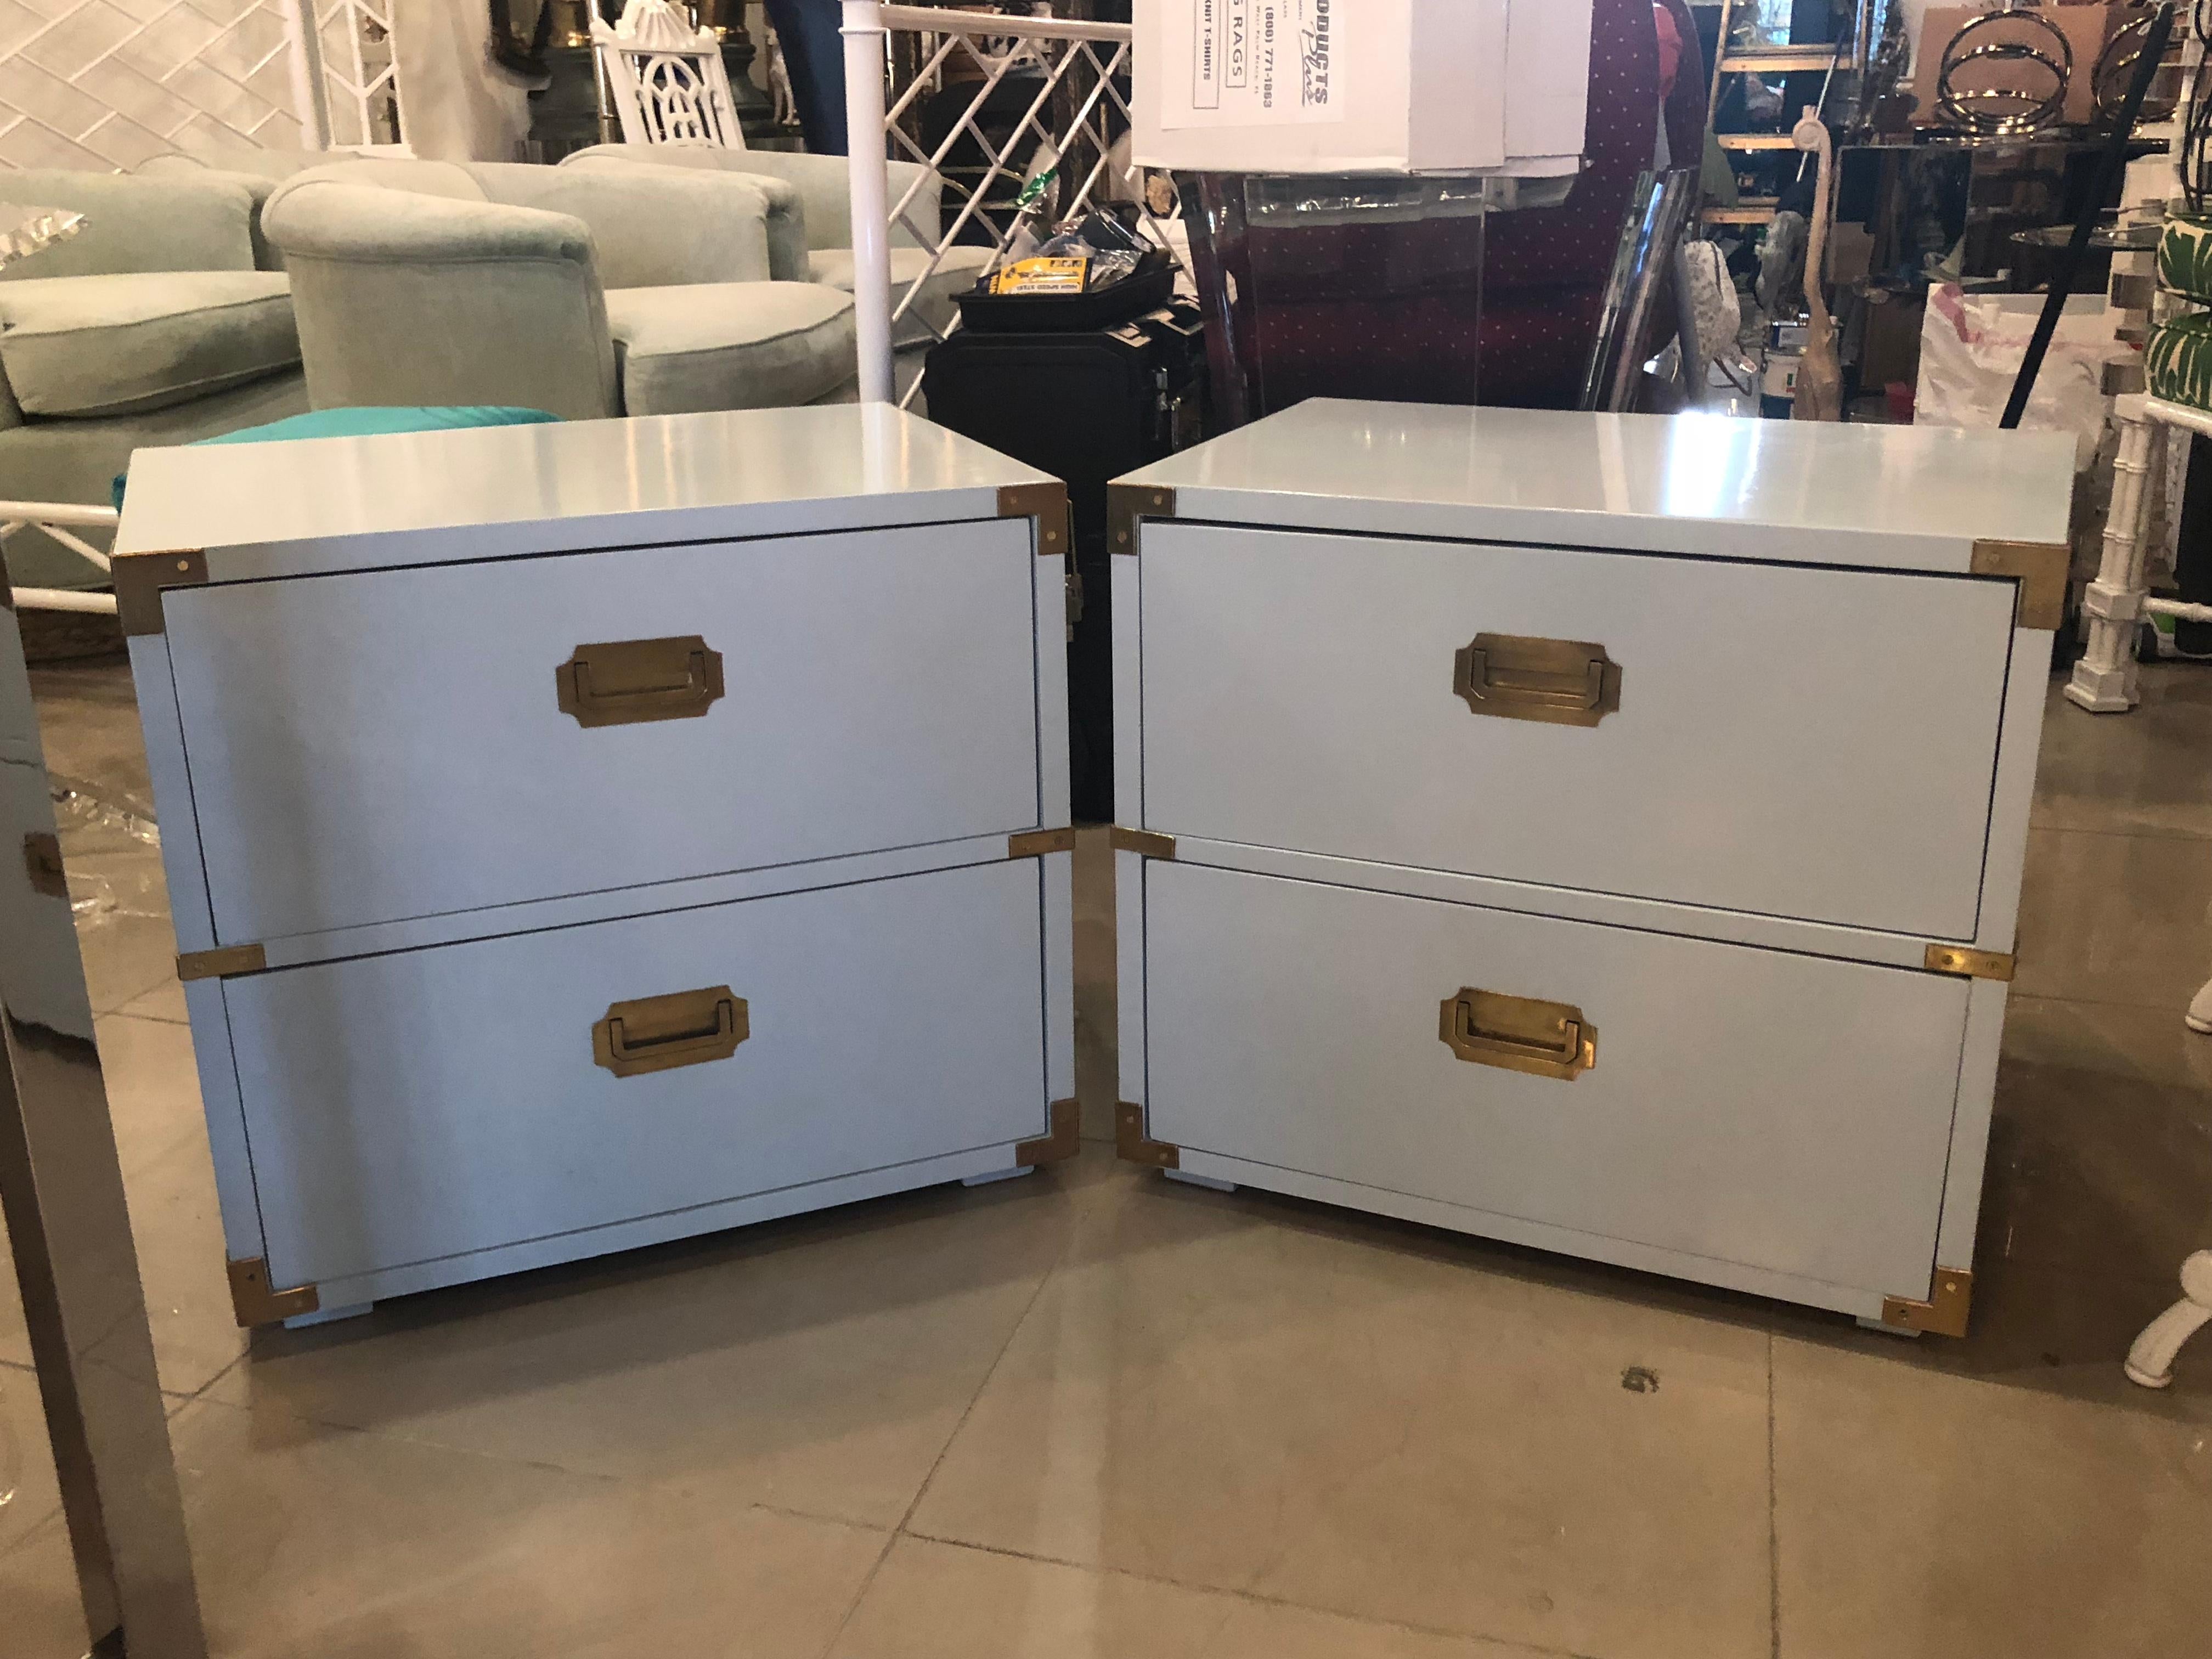 Lovely vintage pair of Lane Furniture campaign nightstands. These have been professionally lacquered in a powder blue. Brass hardware has been polished. May be minor imperfections to the newly lacquered finish.
 